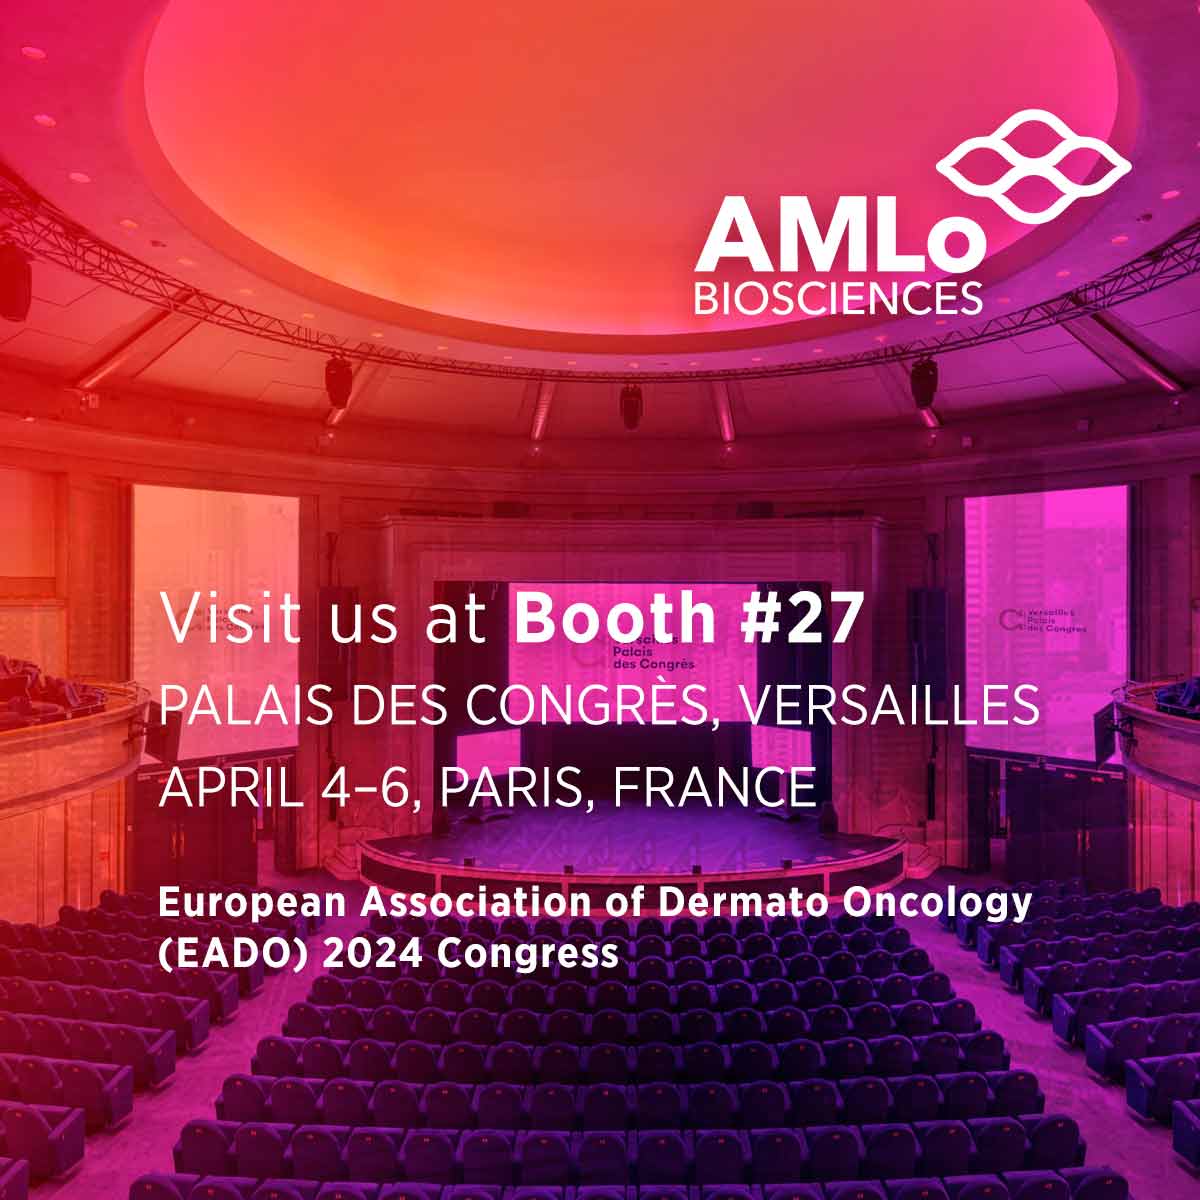 @AMLoBiosciences are delighted to be attending European Association of Dermato-Oncology Congress, Paris 4-6 April. #EADO2024 Stop by booth 27 to speak to the team, take our interactive #dermatology quiz and find out about #AMBLor our prognostic technology. bit.ly/3xlZd5Z